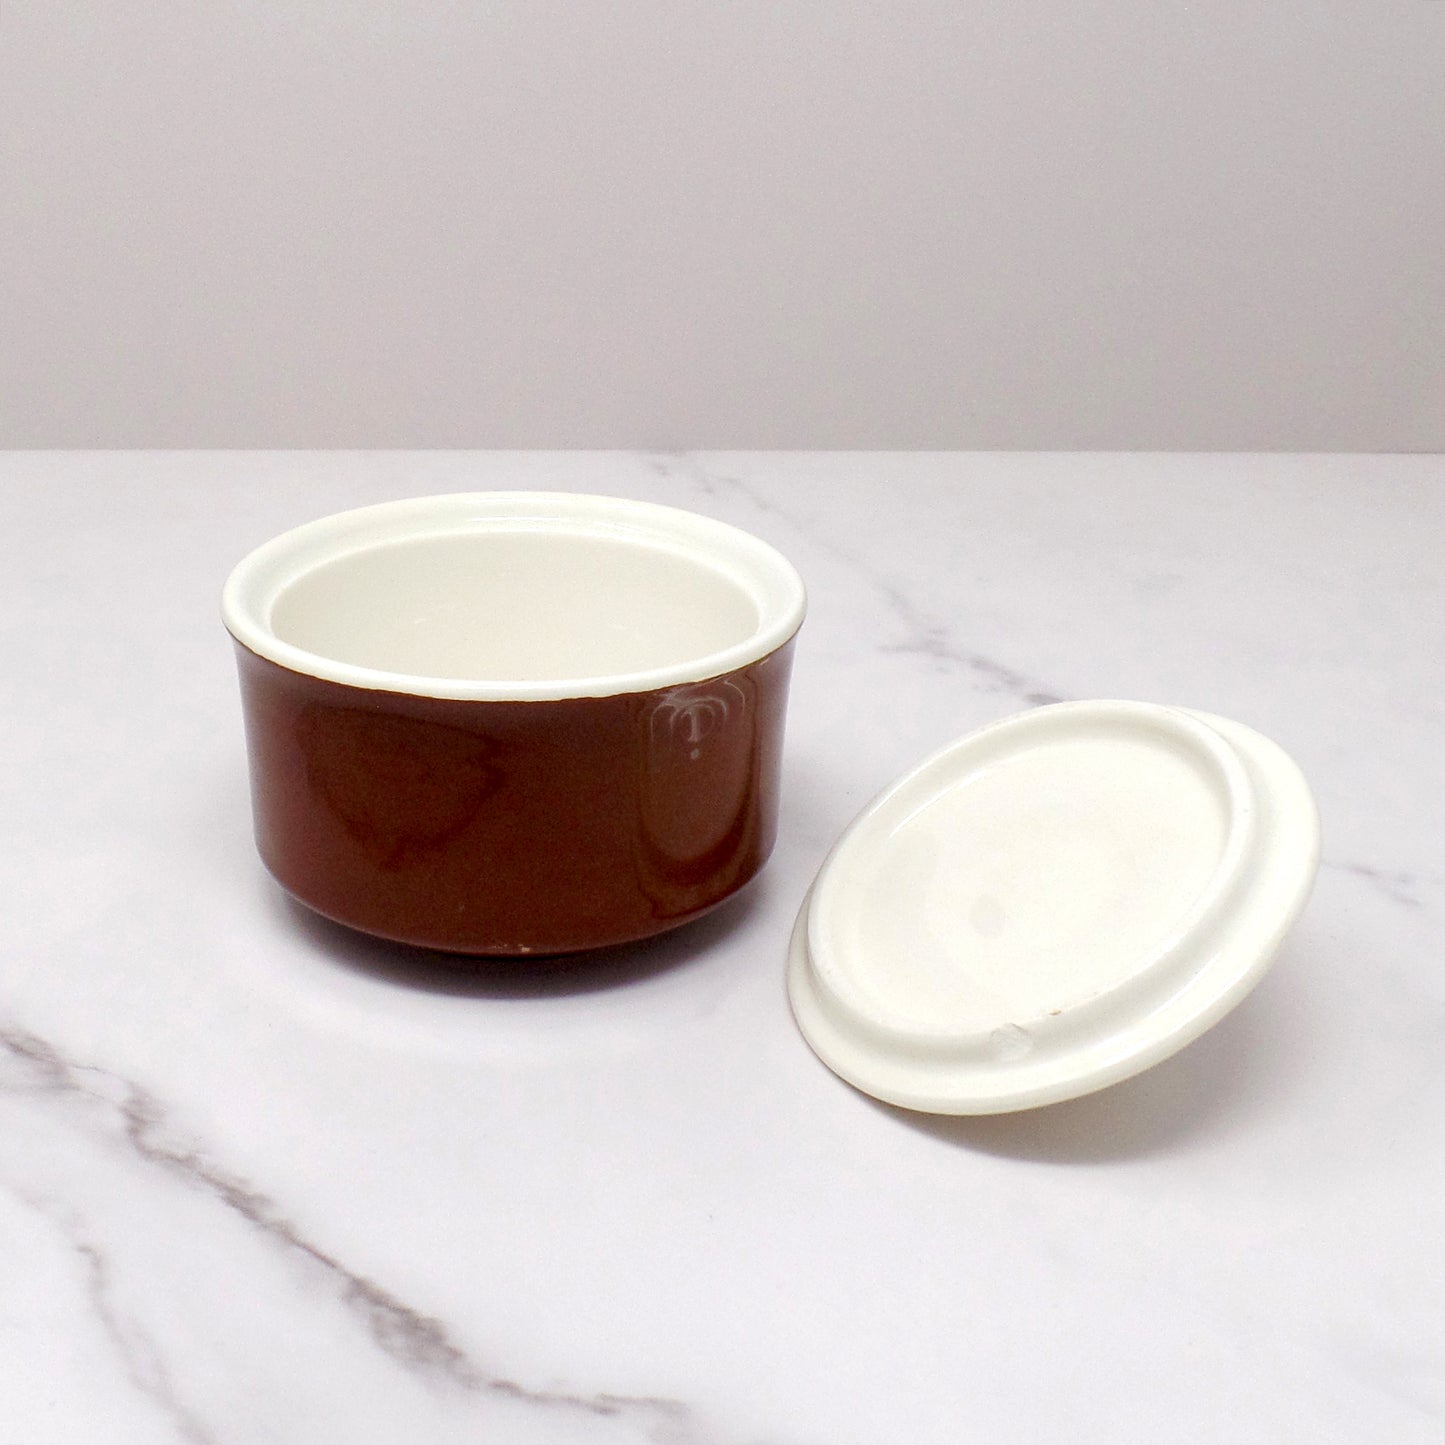 Vintage Brown & Ivory Ceramic Cream and Sugar Set - Mid-Century Modern, Made in USA (1960s)